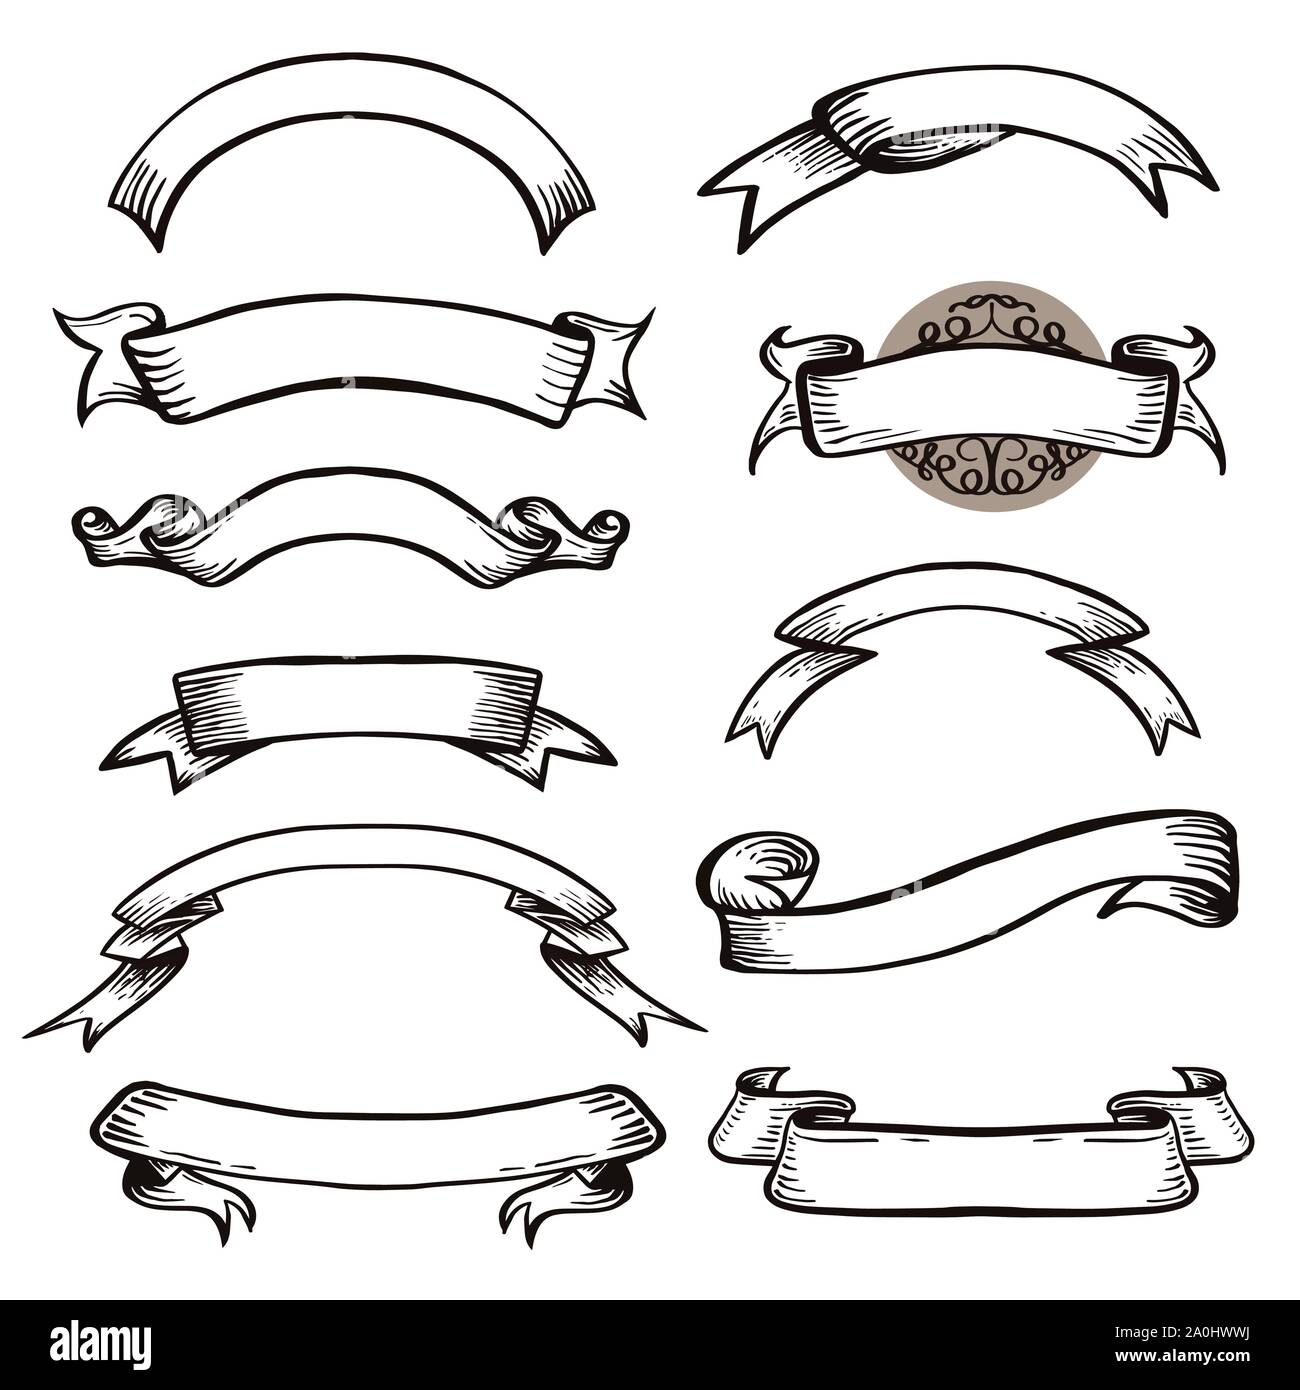 Vintage vector scroll ribbon. Hand drawn sketch elements for posters logos invitation cards, retro heraldic ribbons. Doodle swirl scrolls. Stock Vector